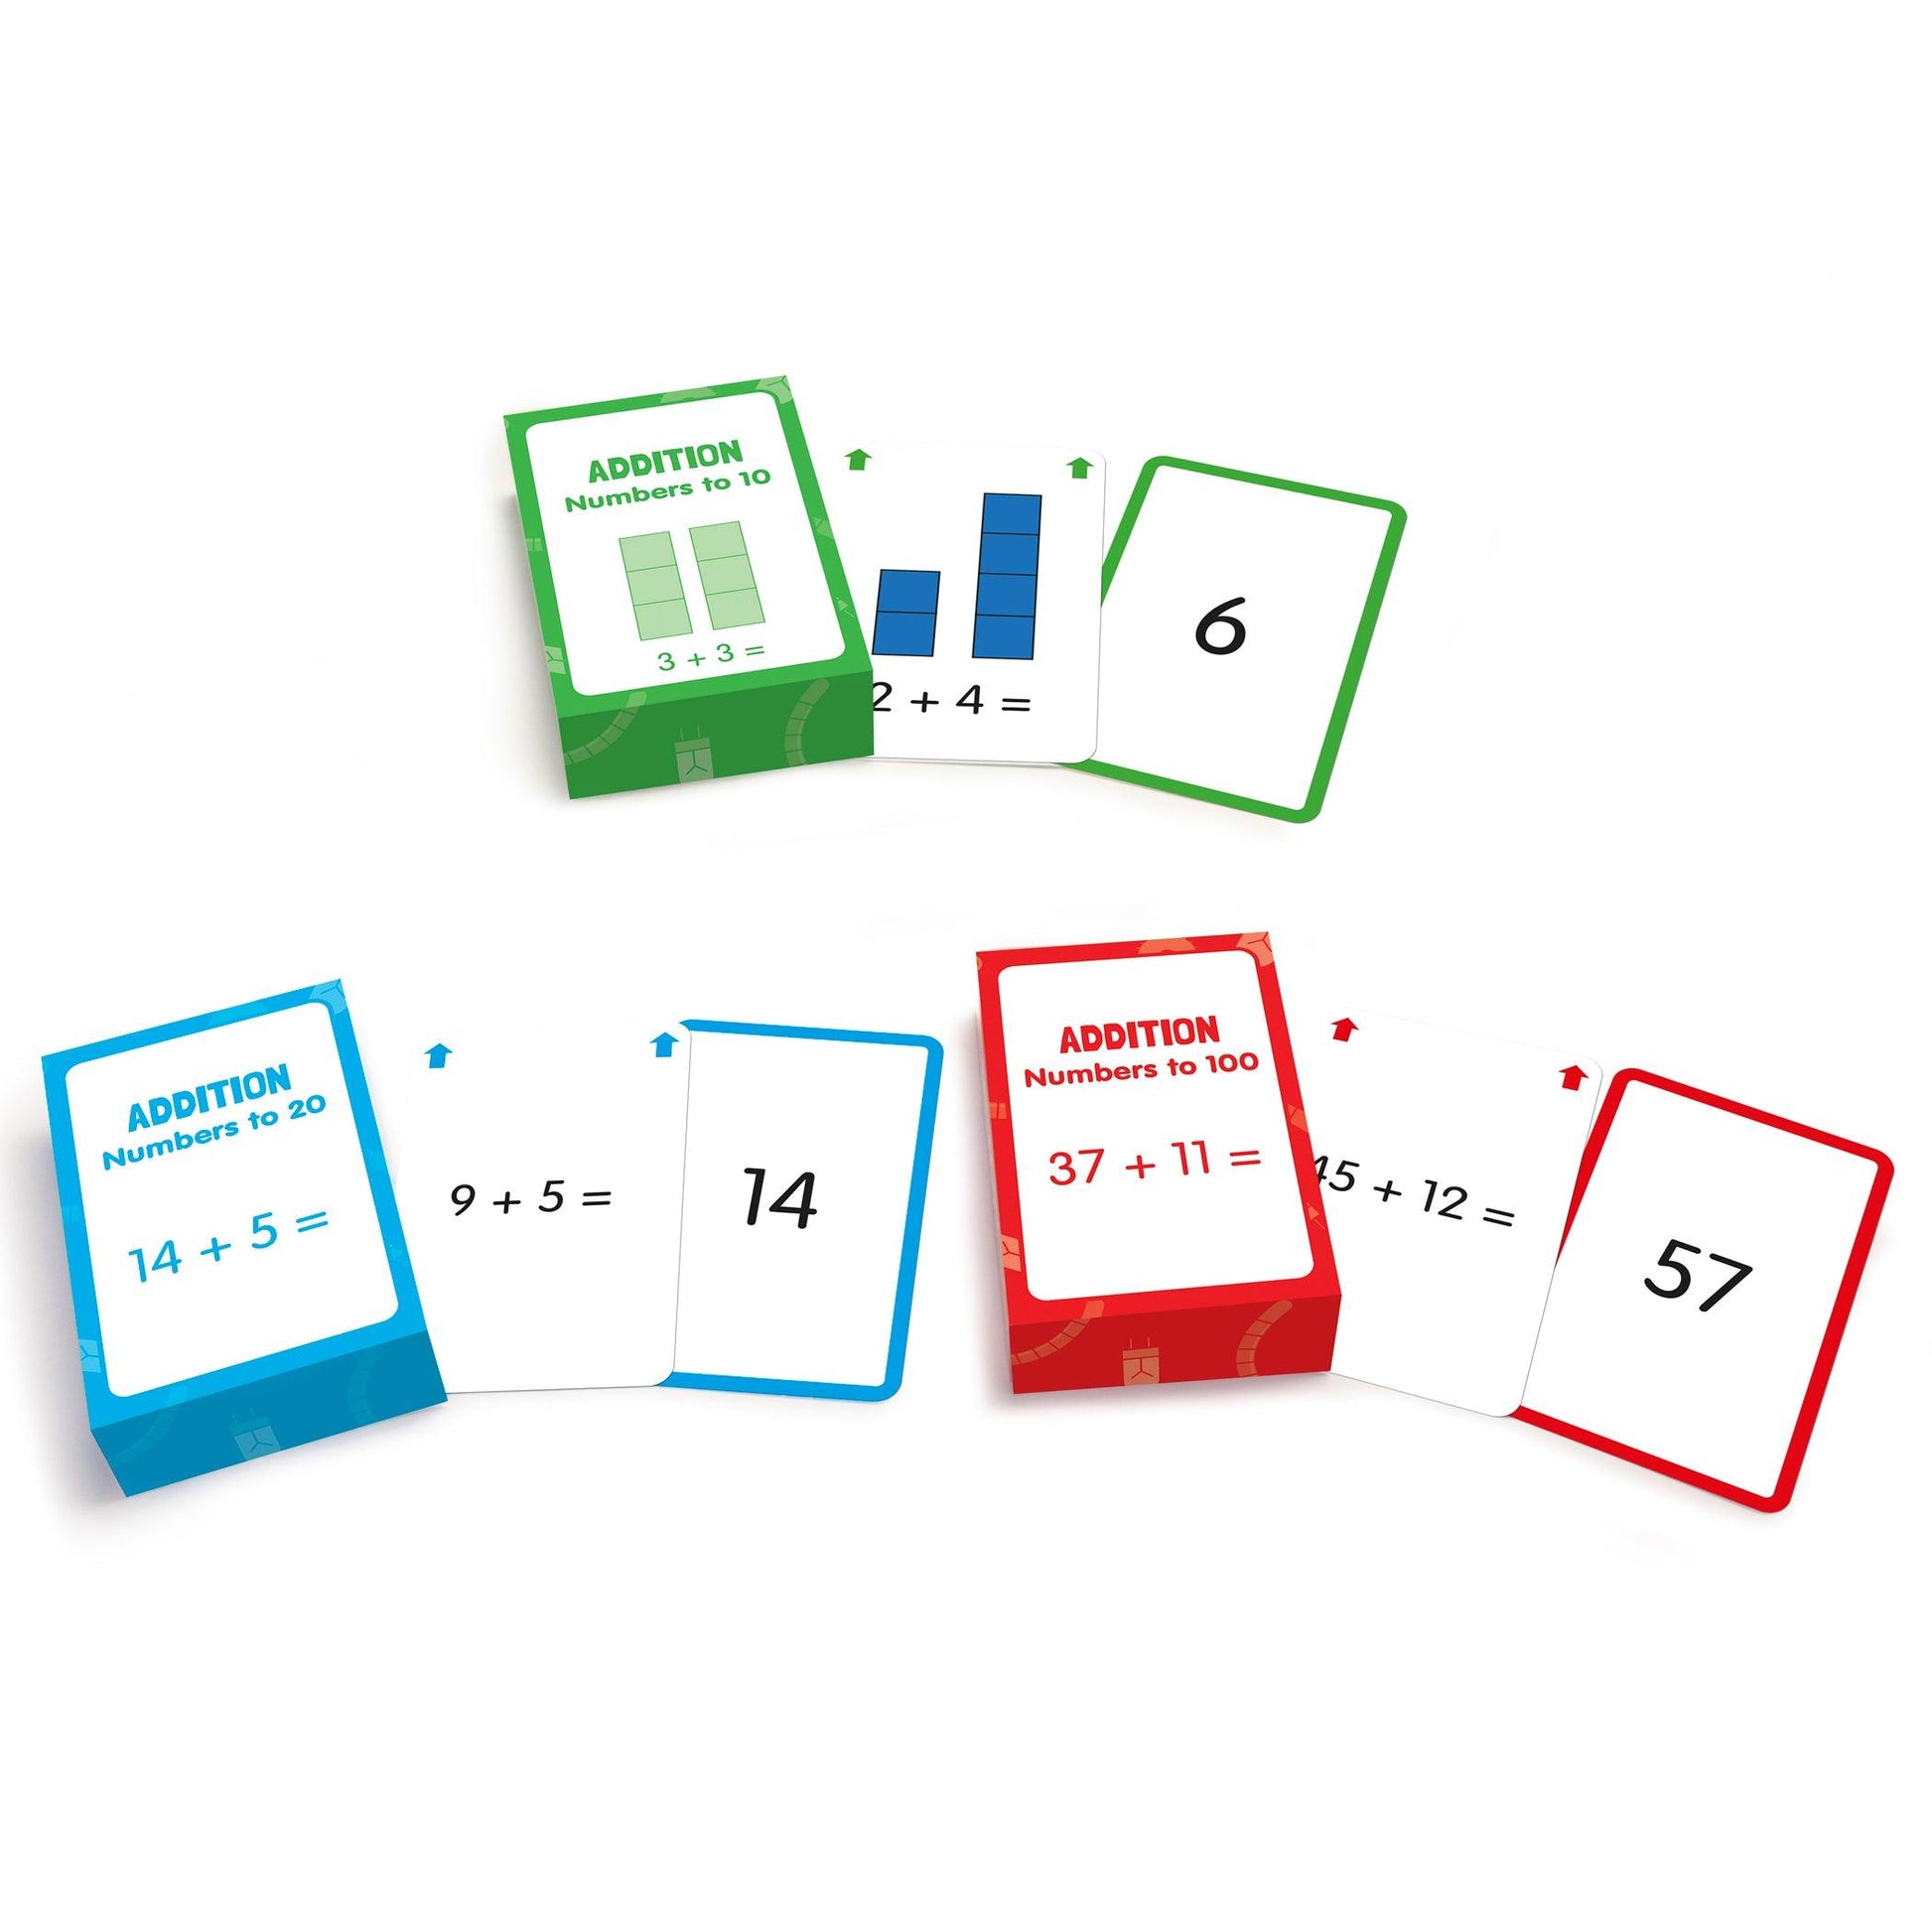 Addition Flashcards, 3 Sets Per Pack, 3 Packs - Loomini